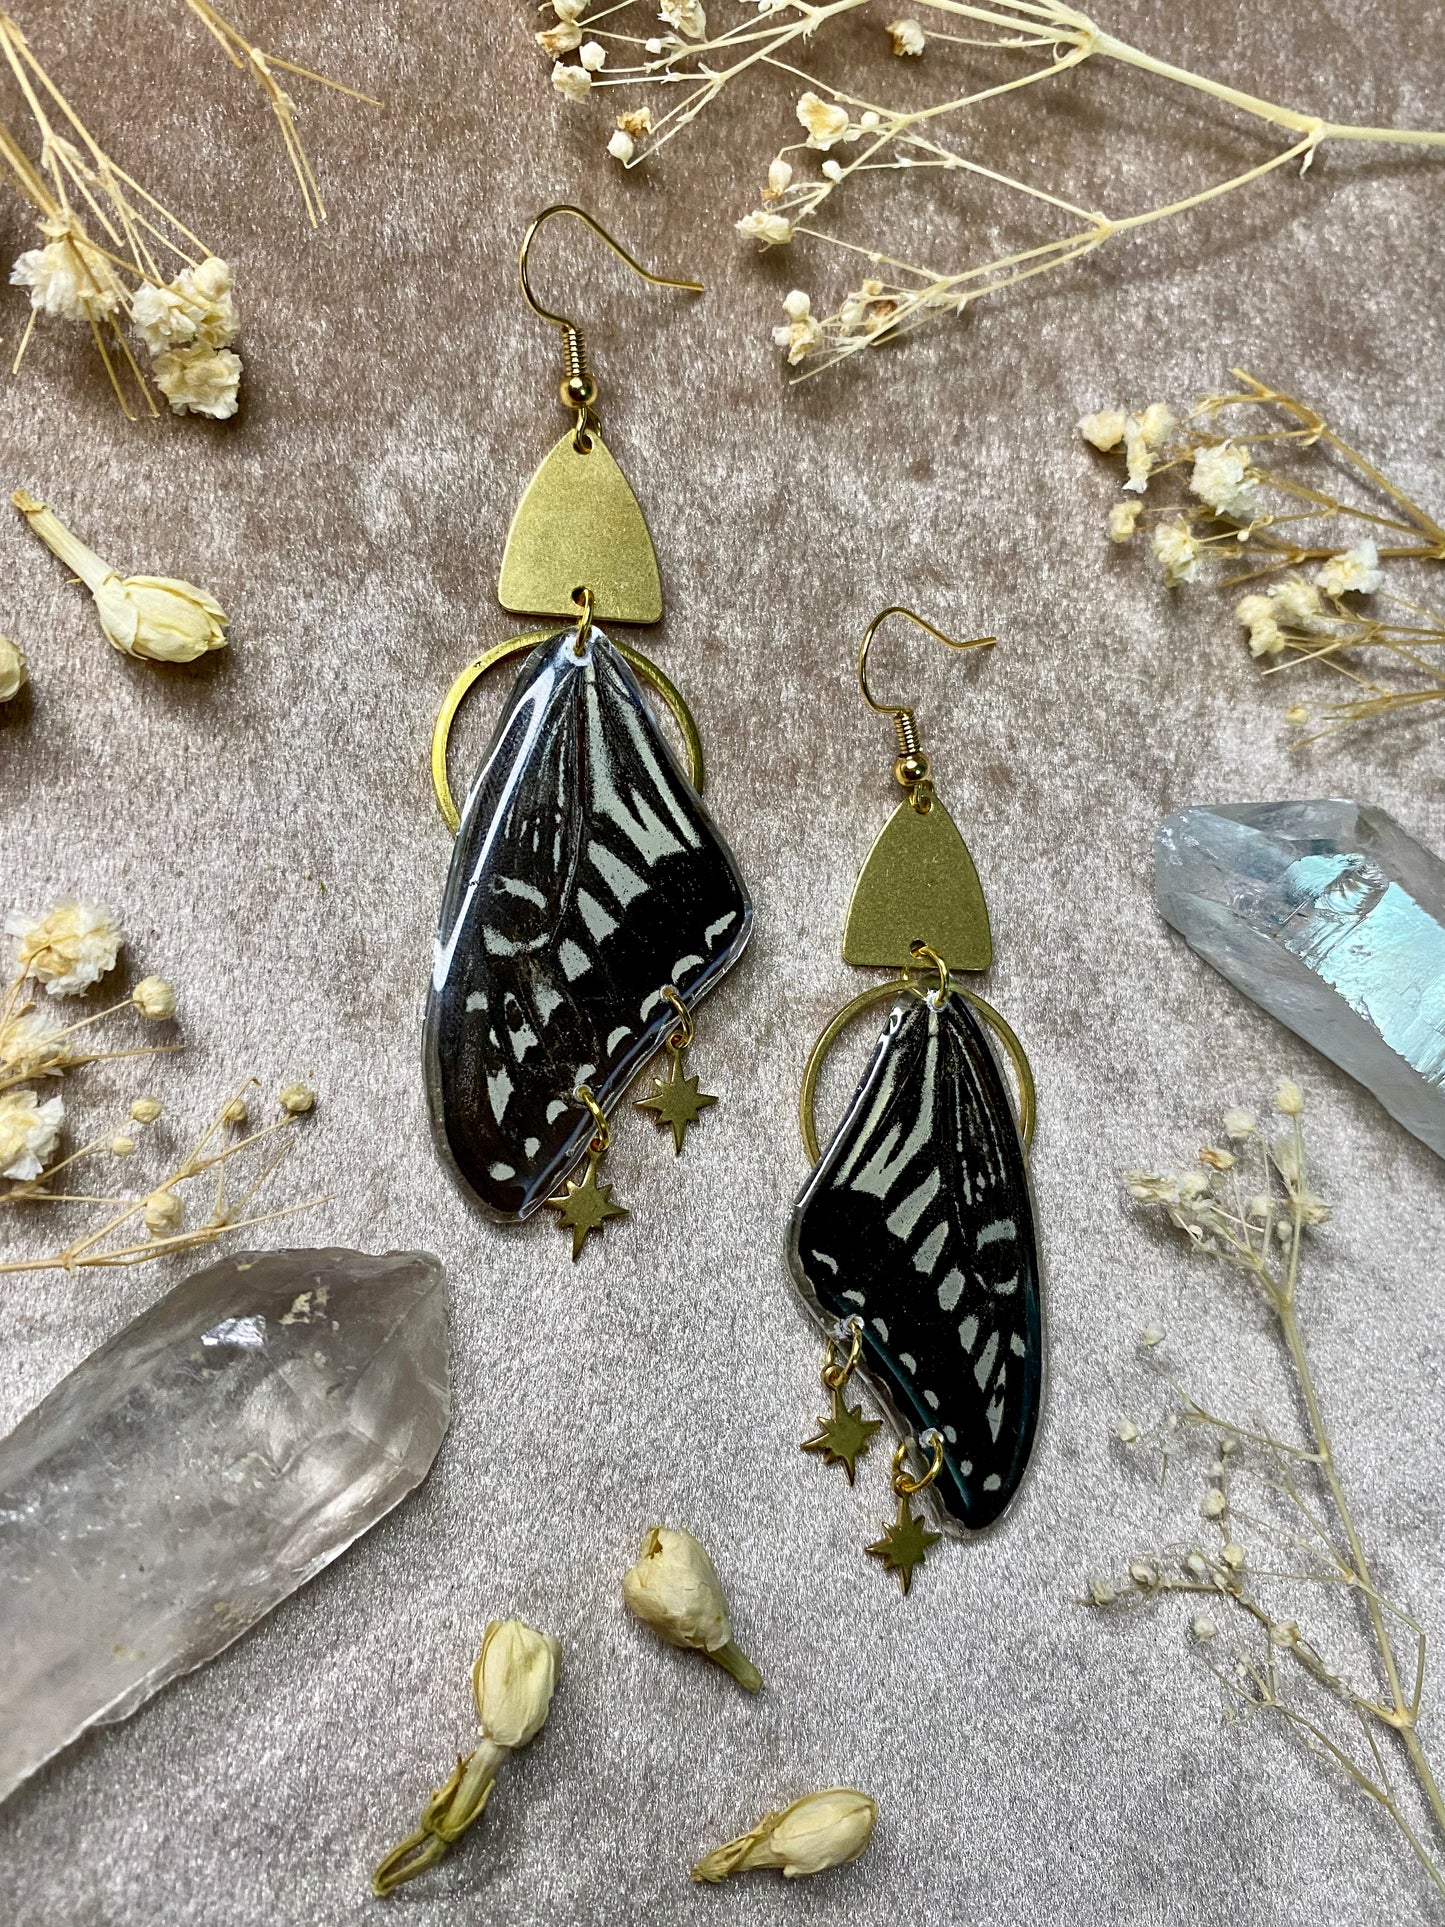 Black and White Asian Swallowtail Butterfly Wing Earrings (Top Wings)